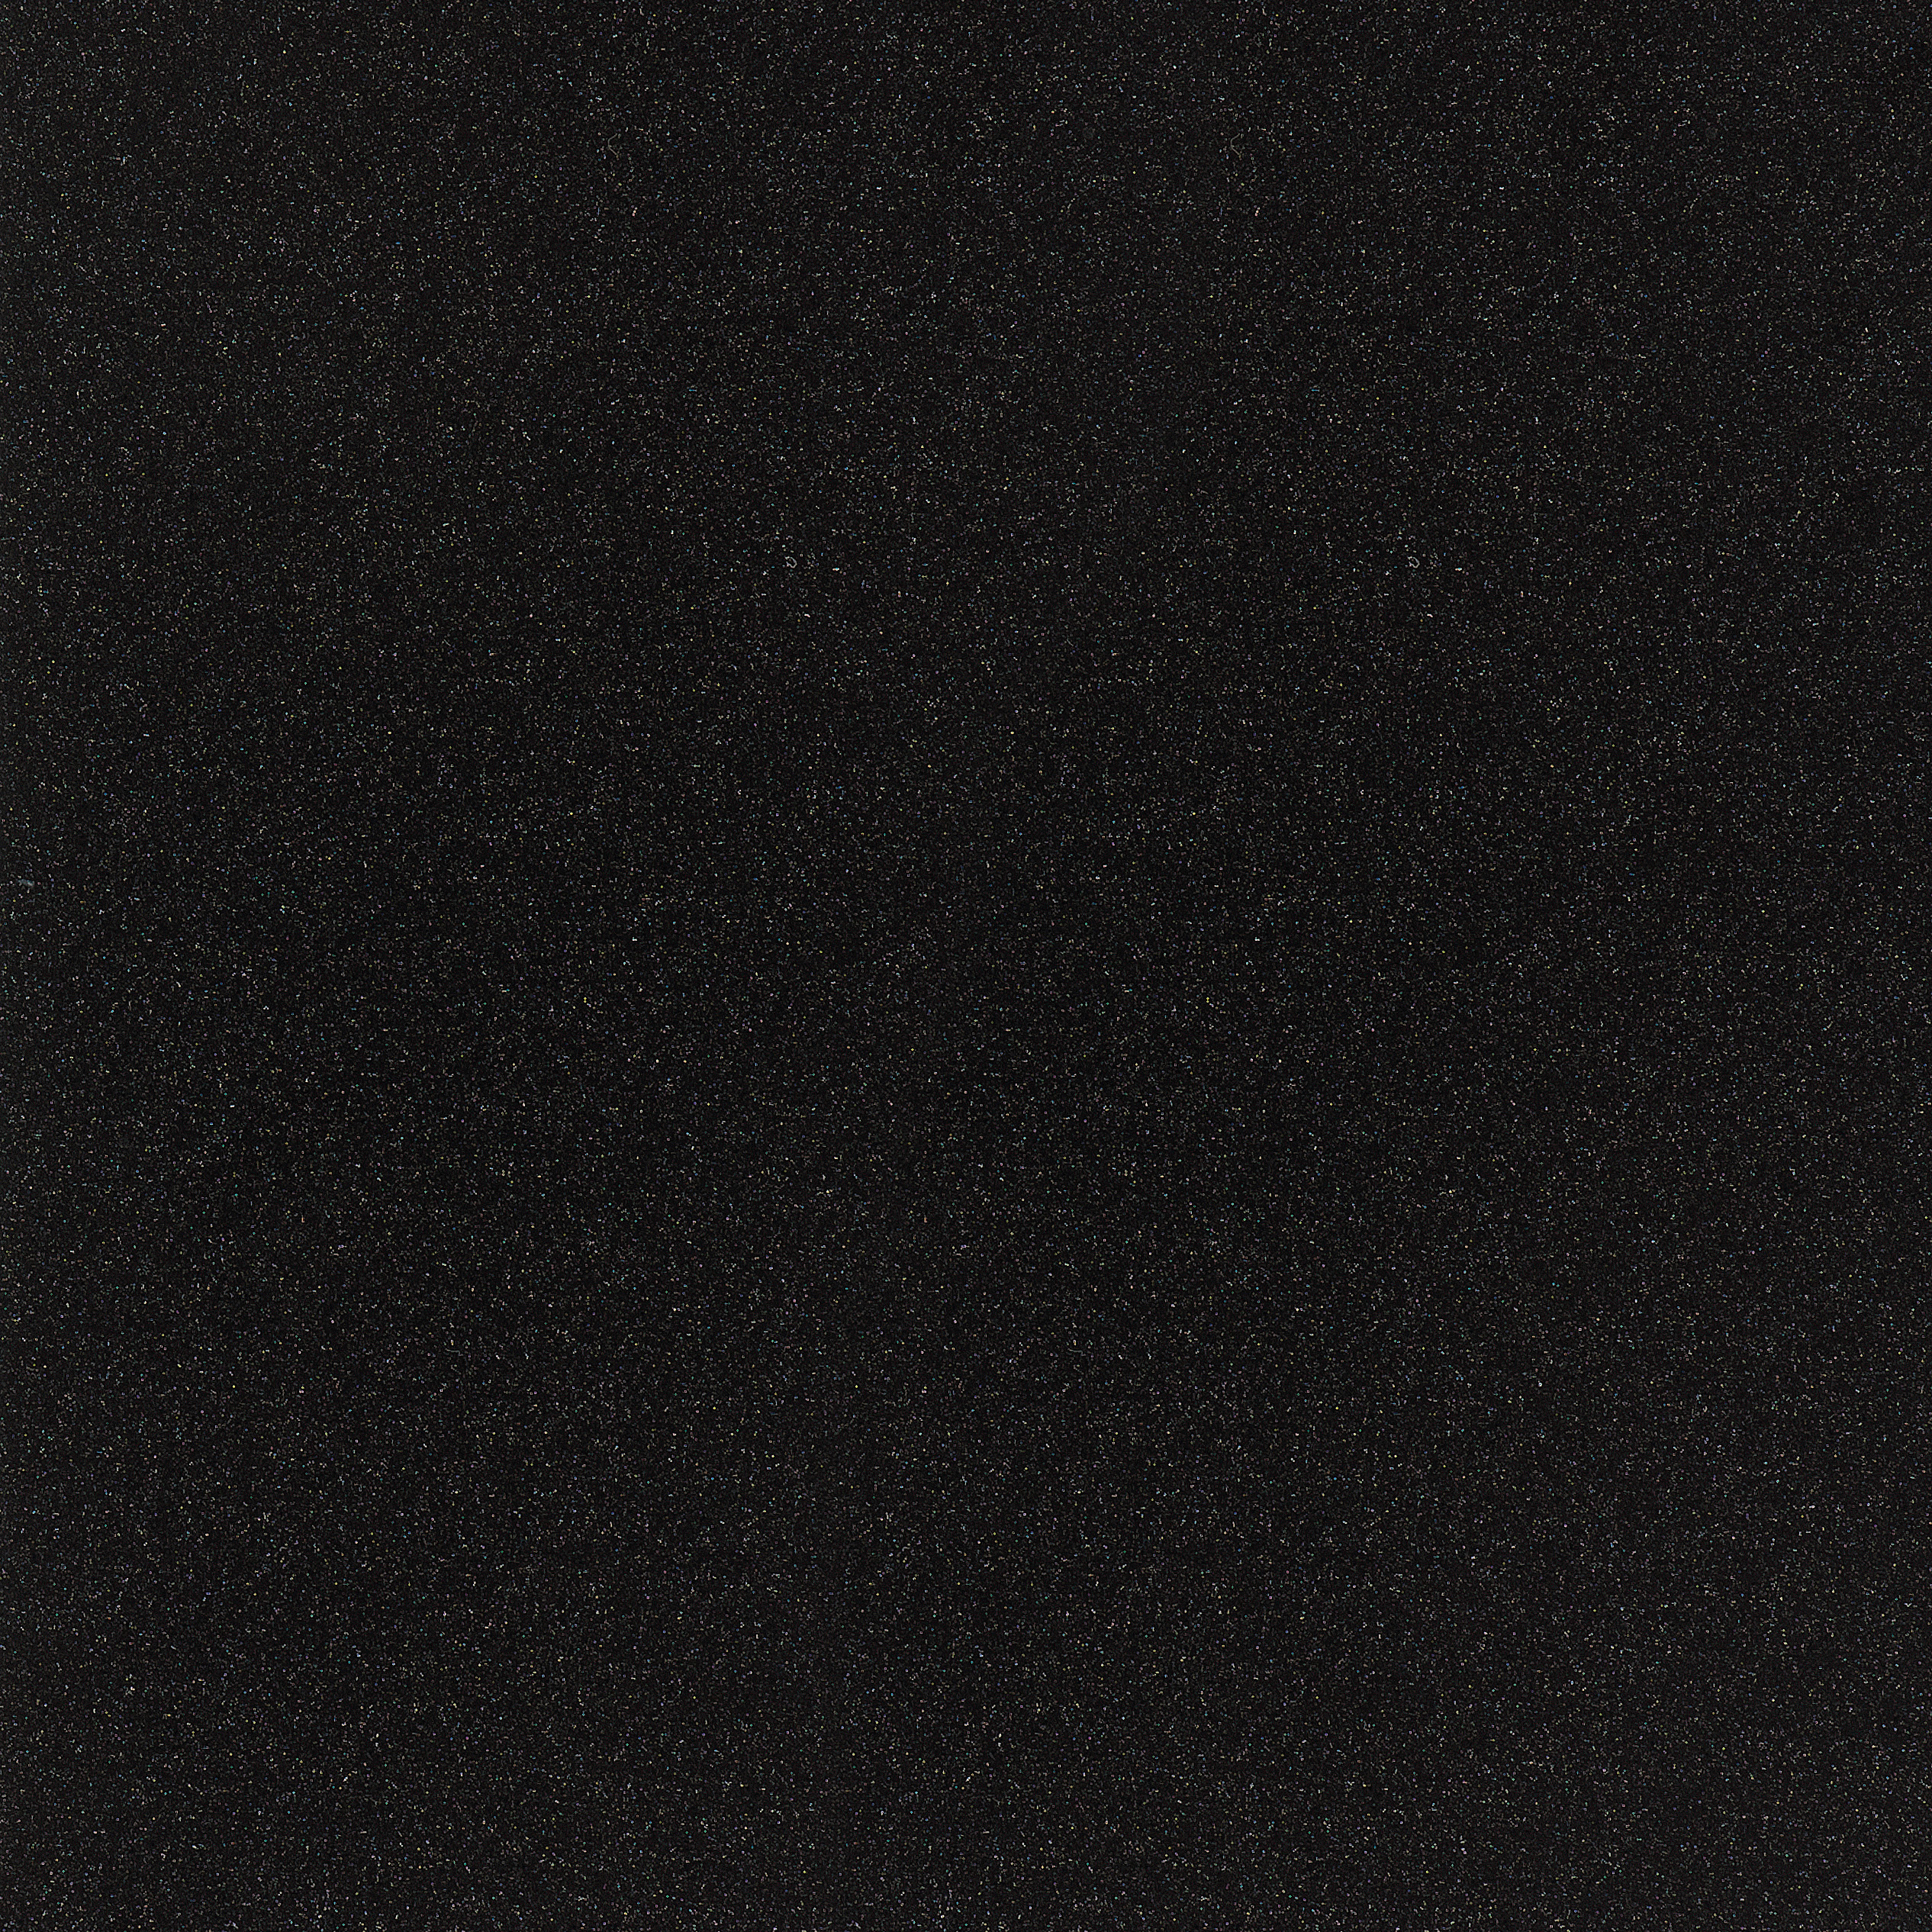 Image of Duarti By Calypso Black Stone Solid Surface Slimline Worktop - 1044 x 230 x 12mm